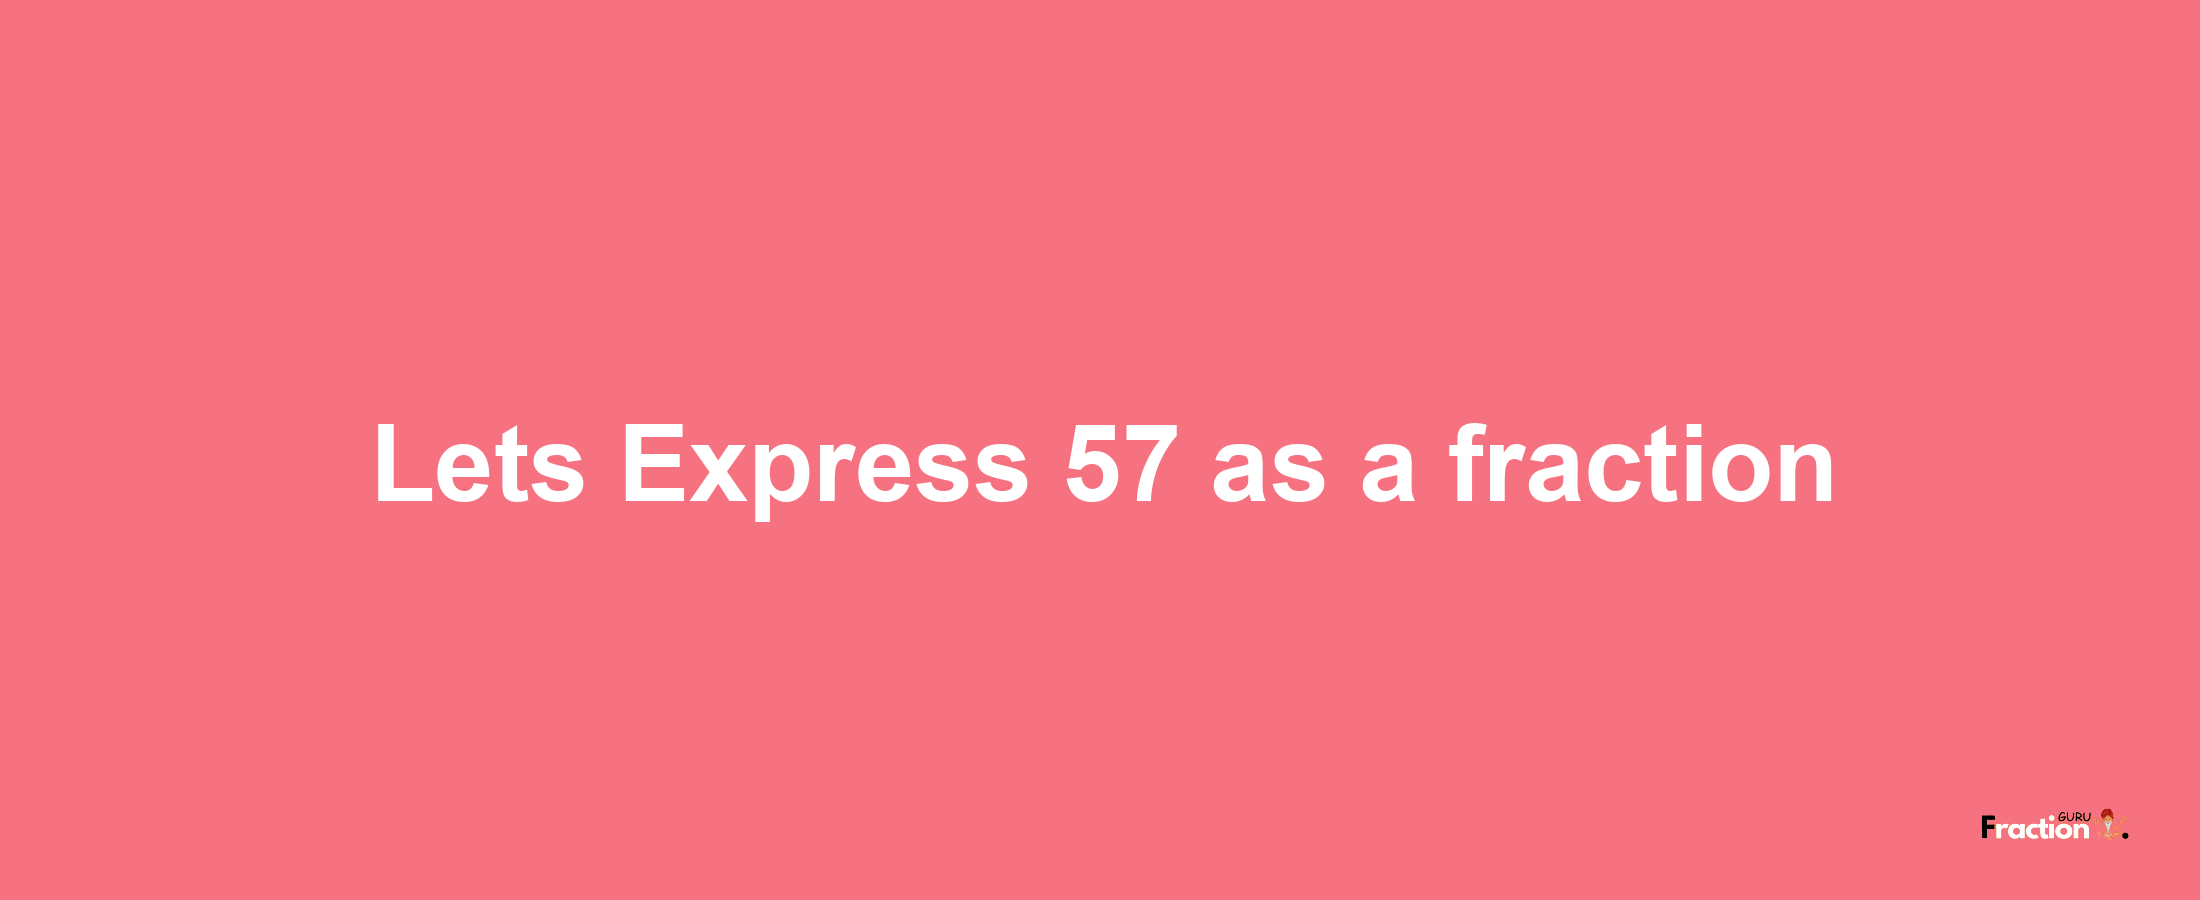 Lets Express 57 as afraction